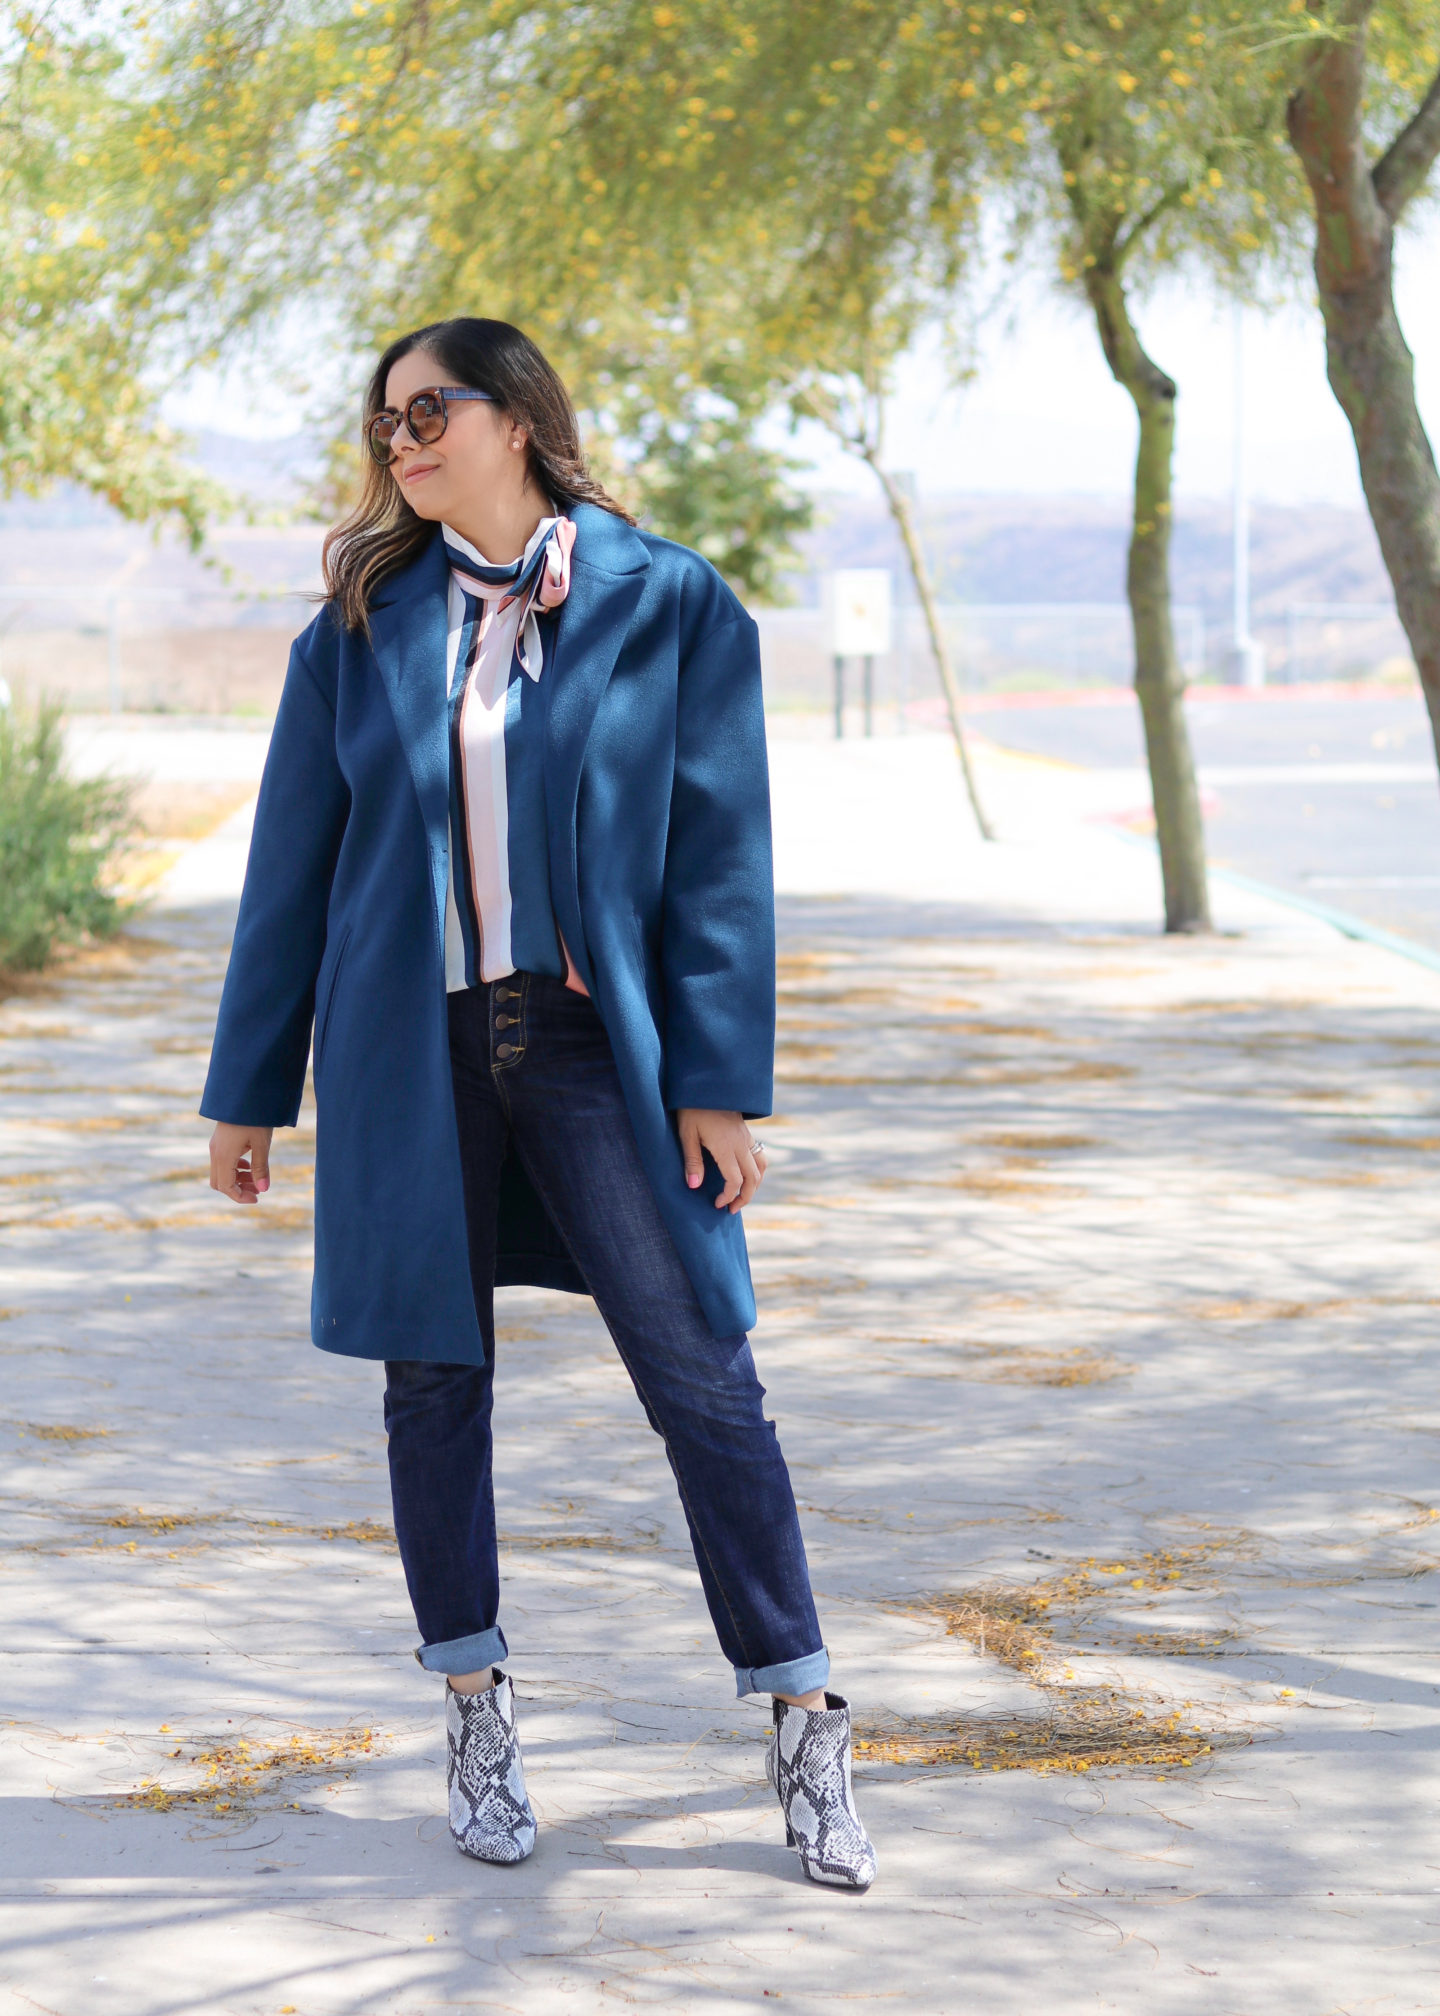 Chic fall outfit, work casual fall outfit, teal coat outfit